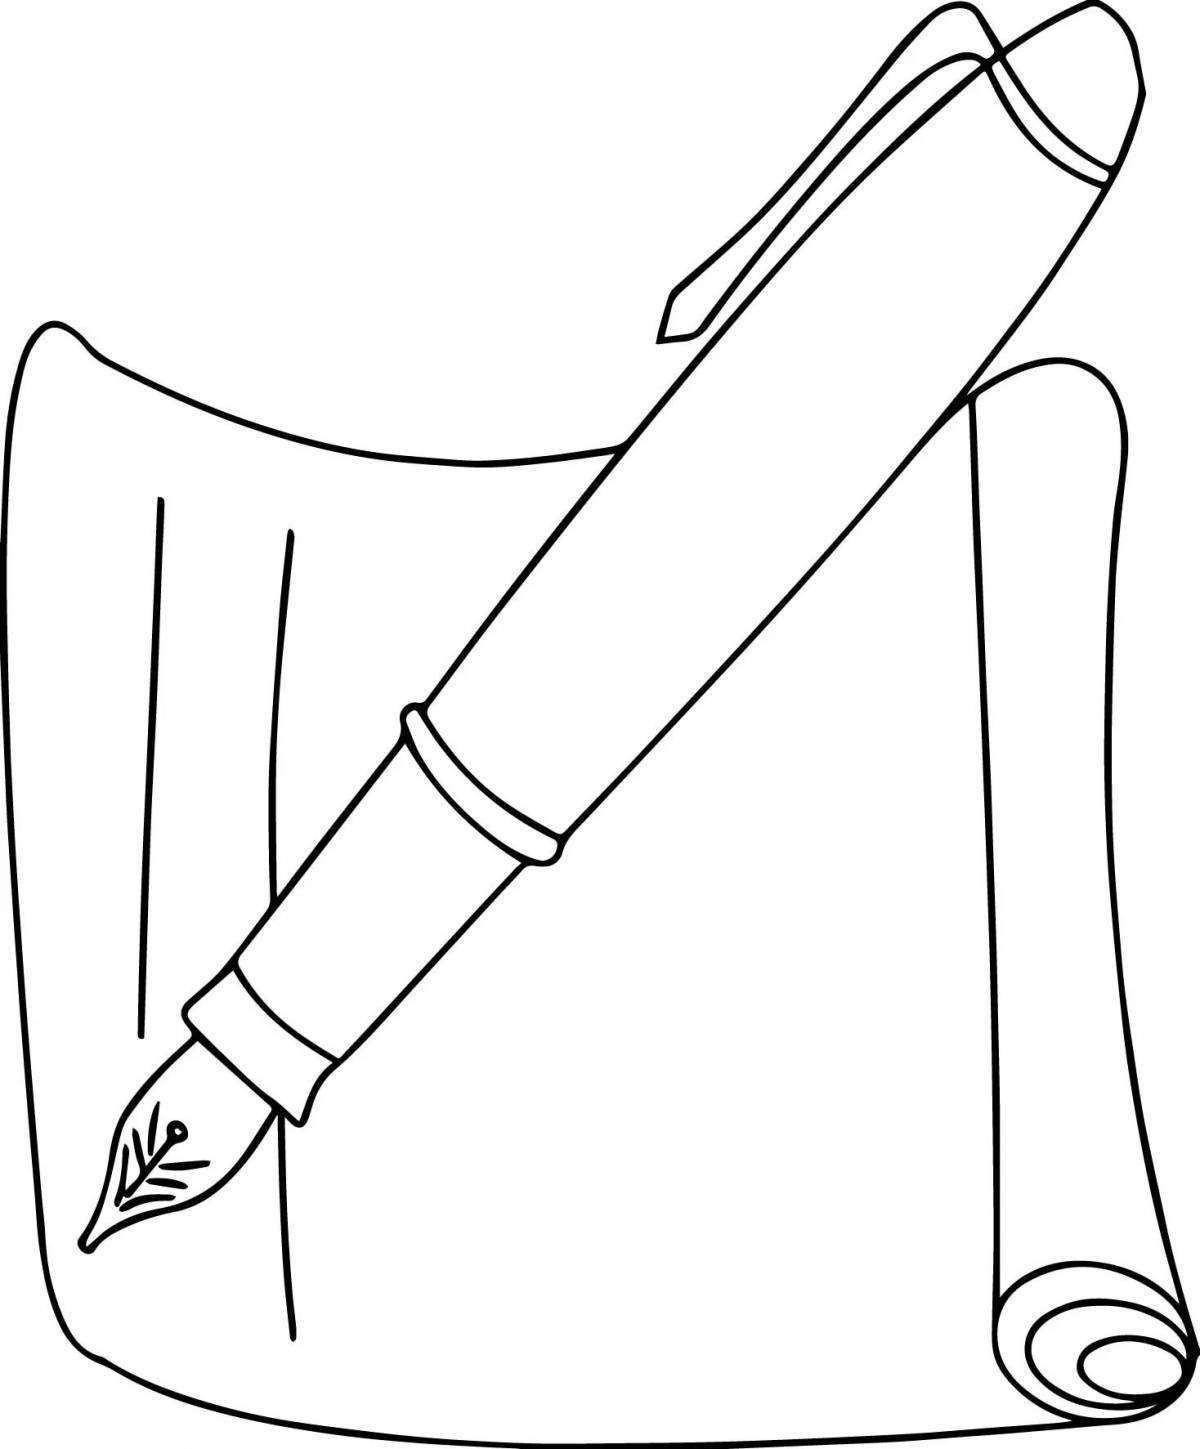 Colorful pen coloring page for preschoolers